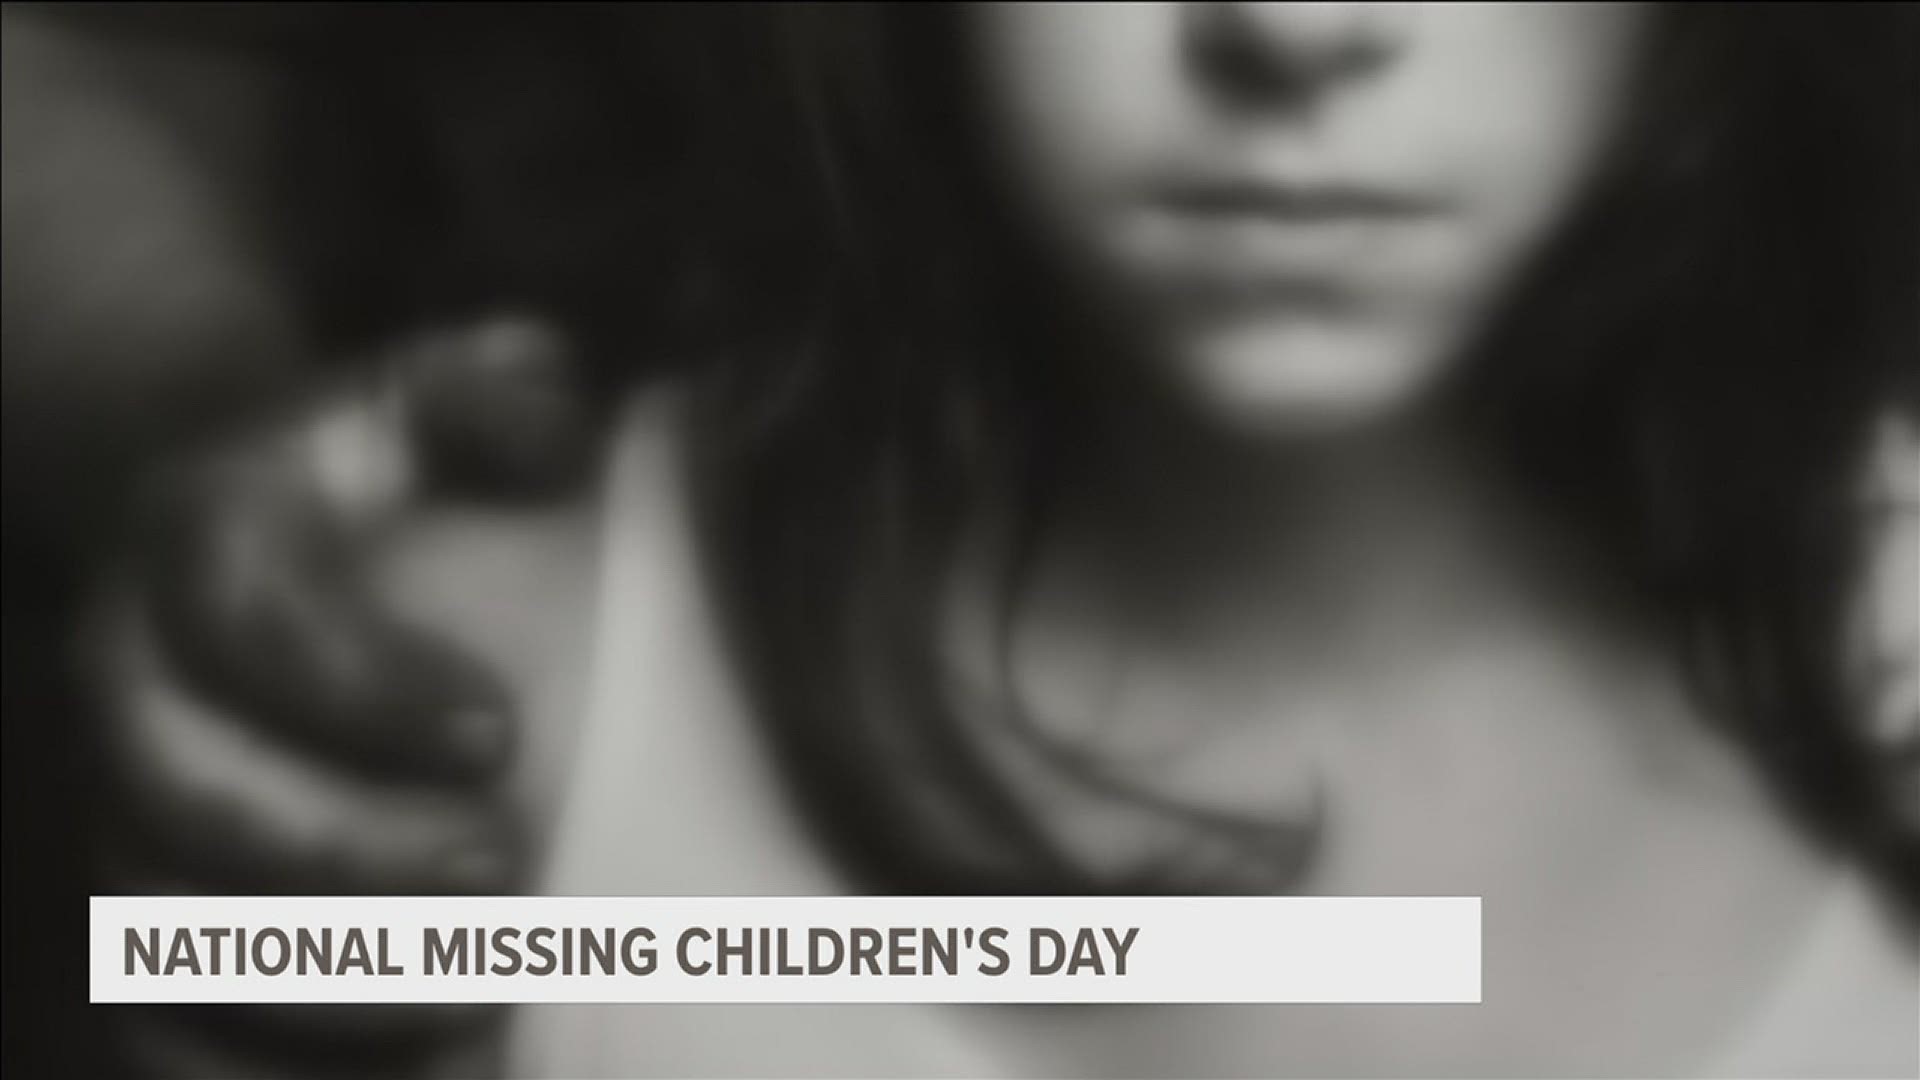 The National Center for Missing and Exploited Children report 94% of children that go missing are endangered runaways